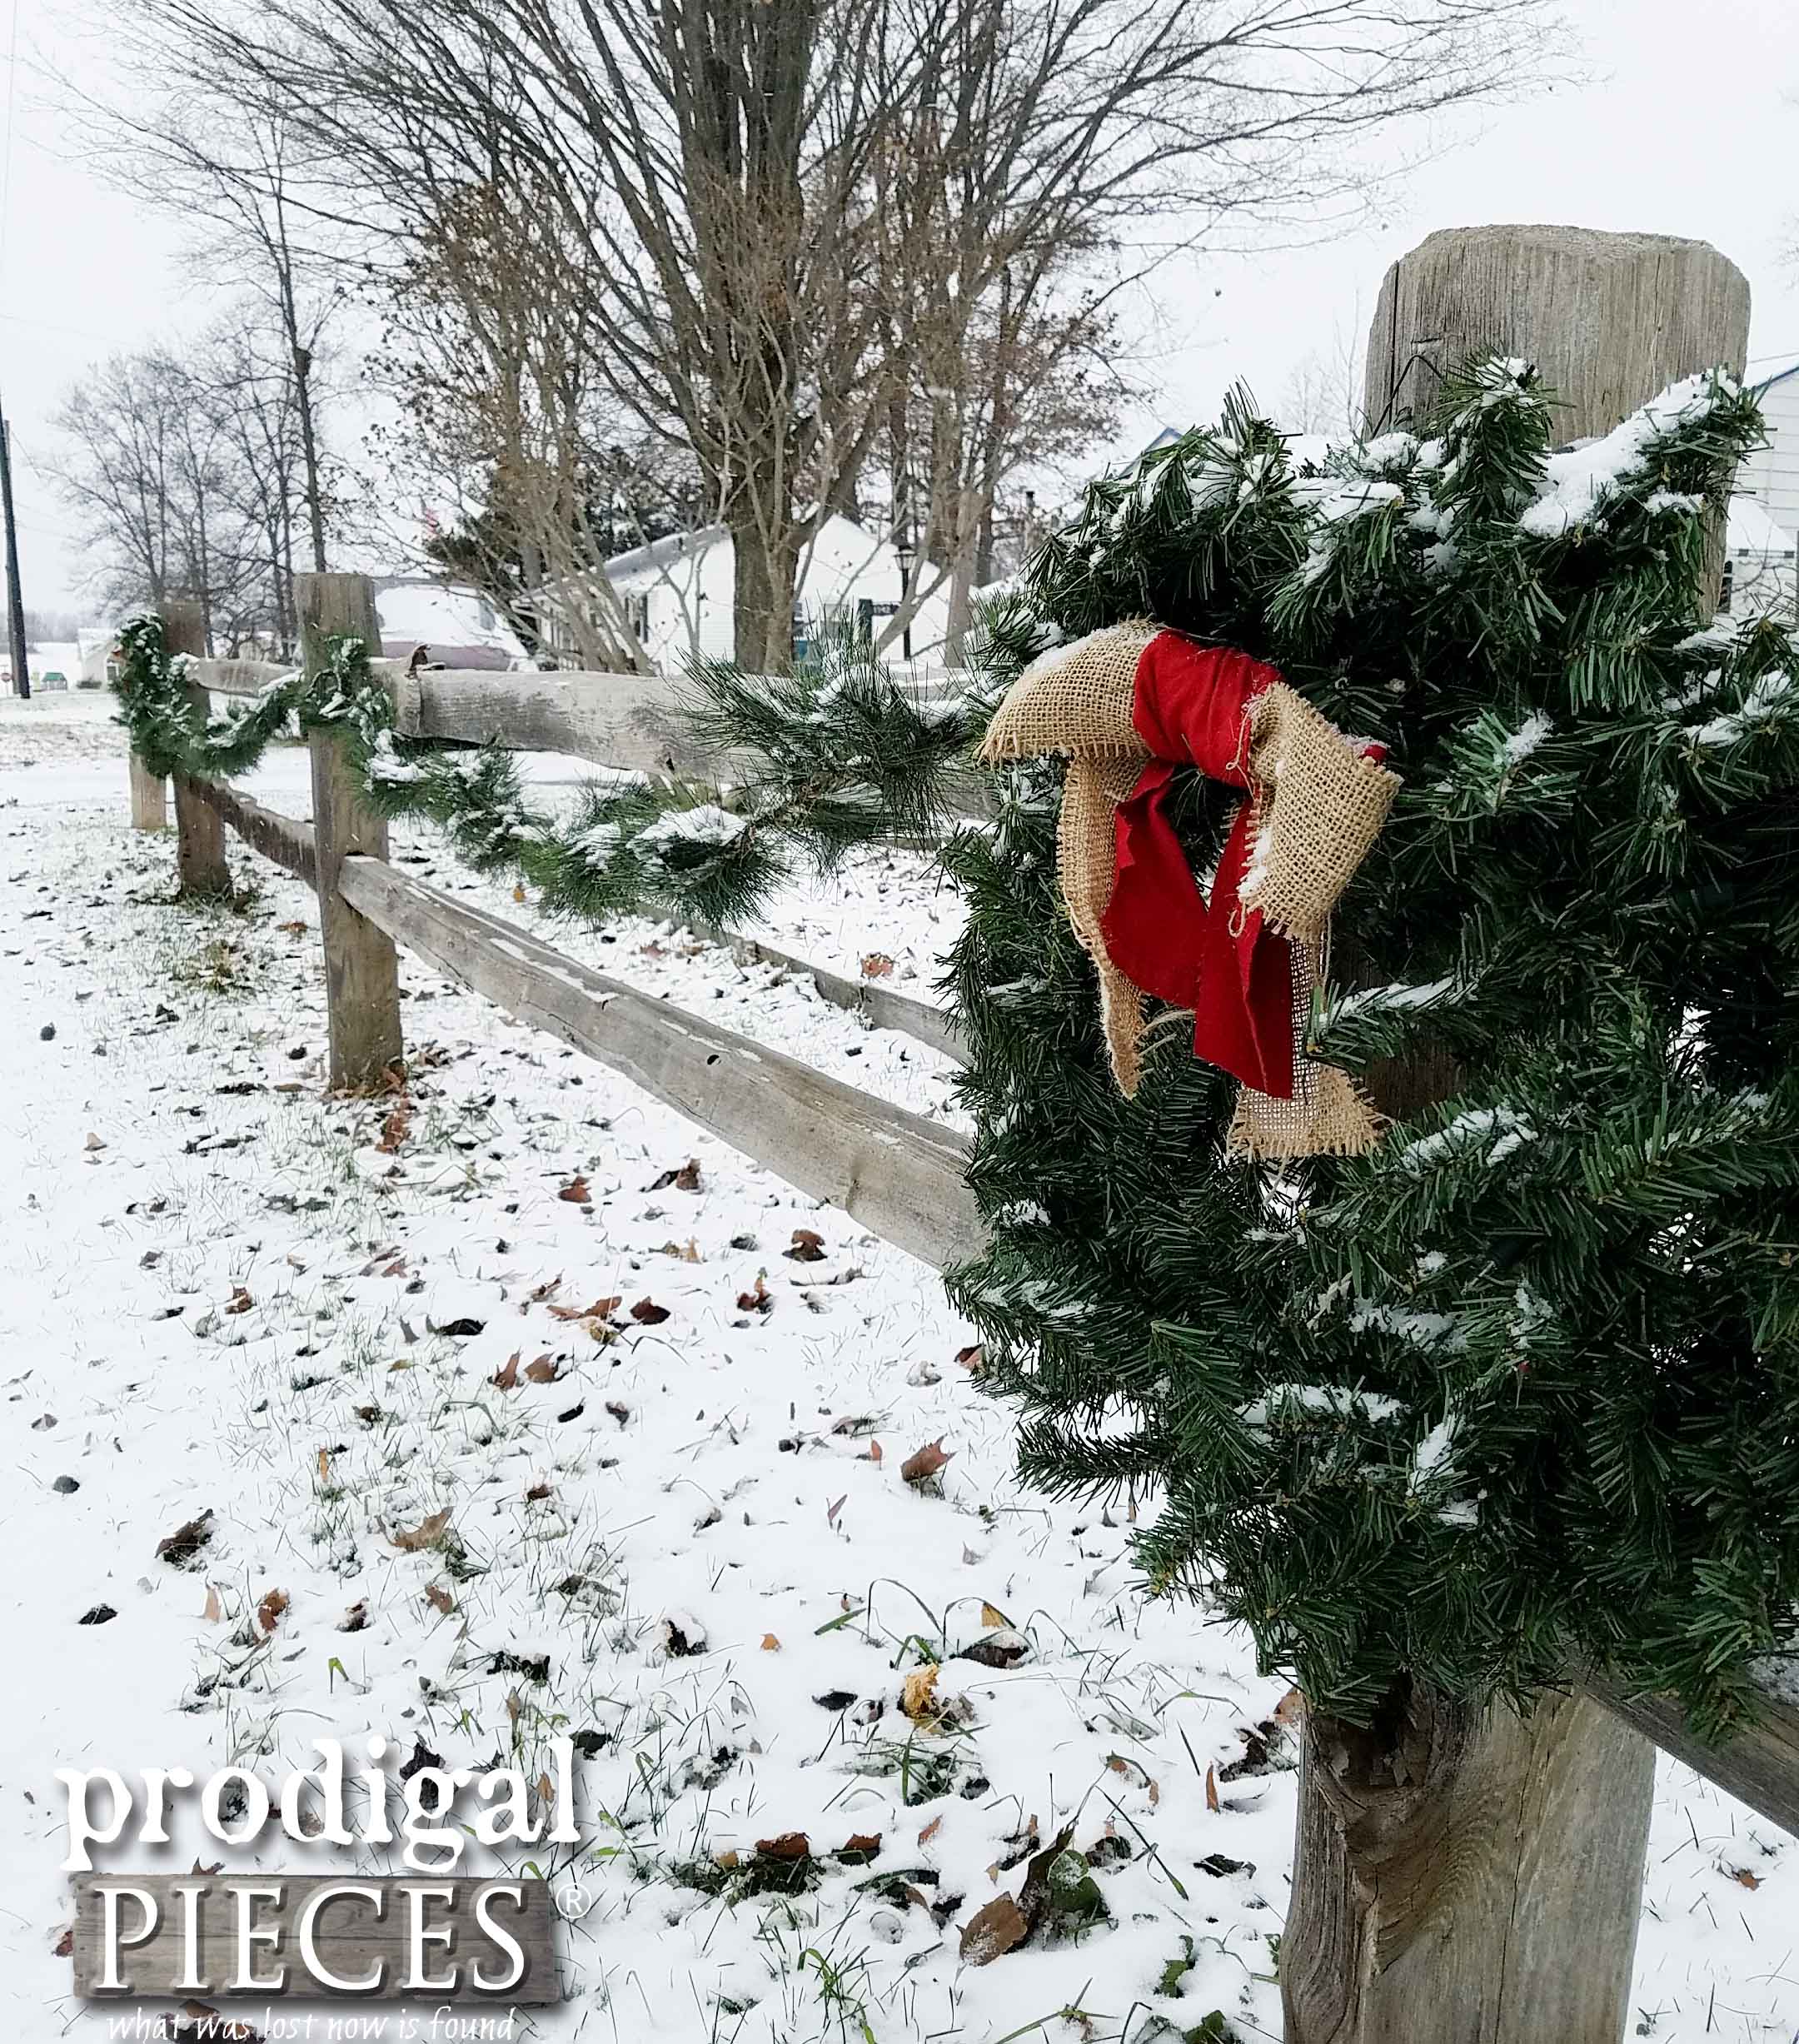 Split Rail Fence with Holiday Garland and Wreaths | Prodigal Pieces | prodigalpieces.com